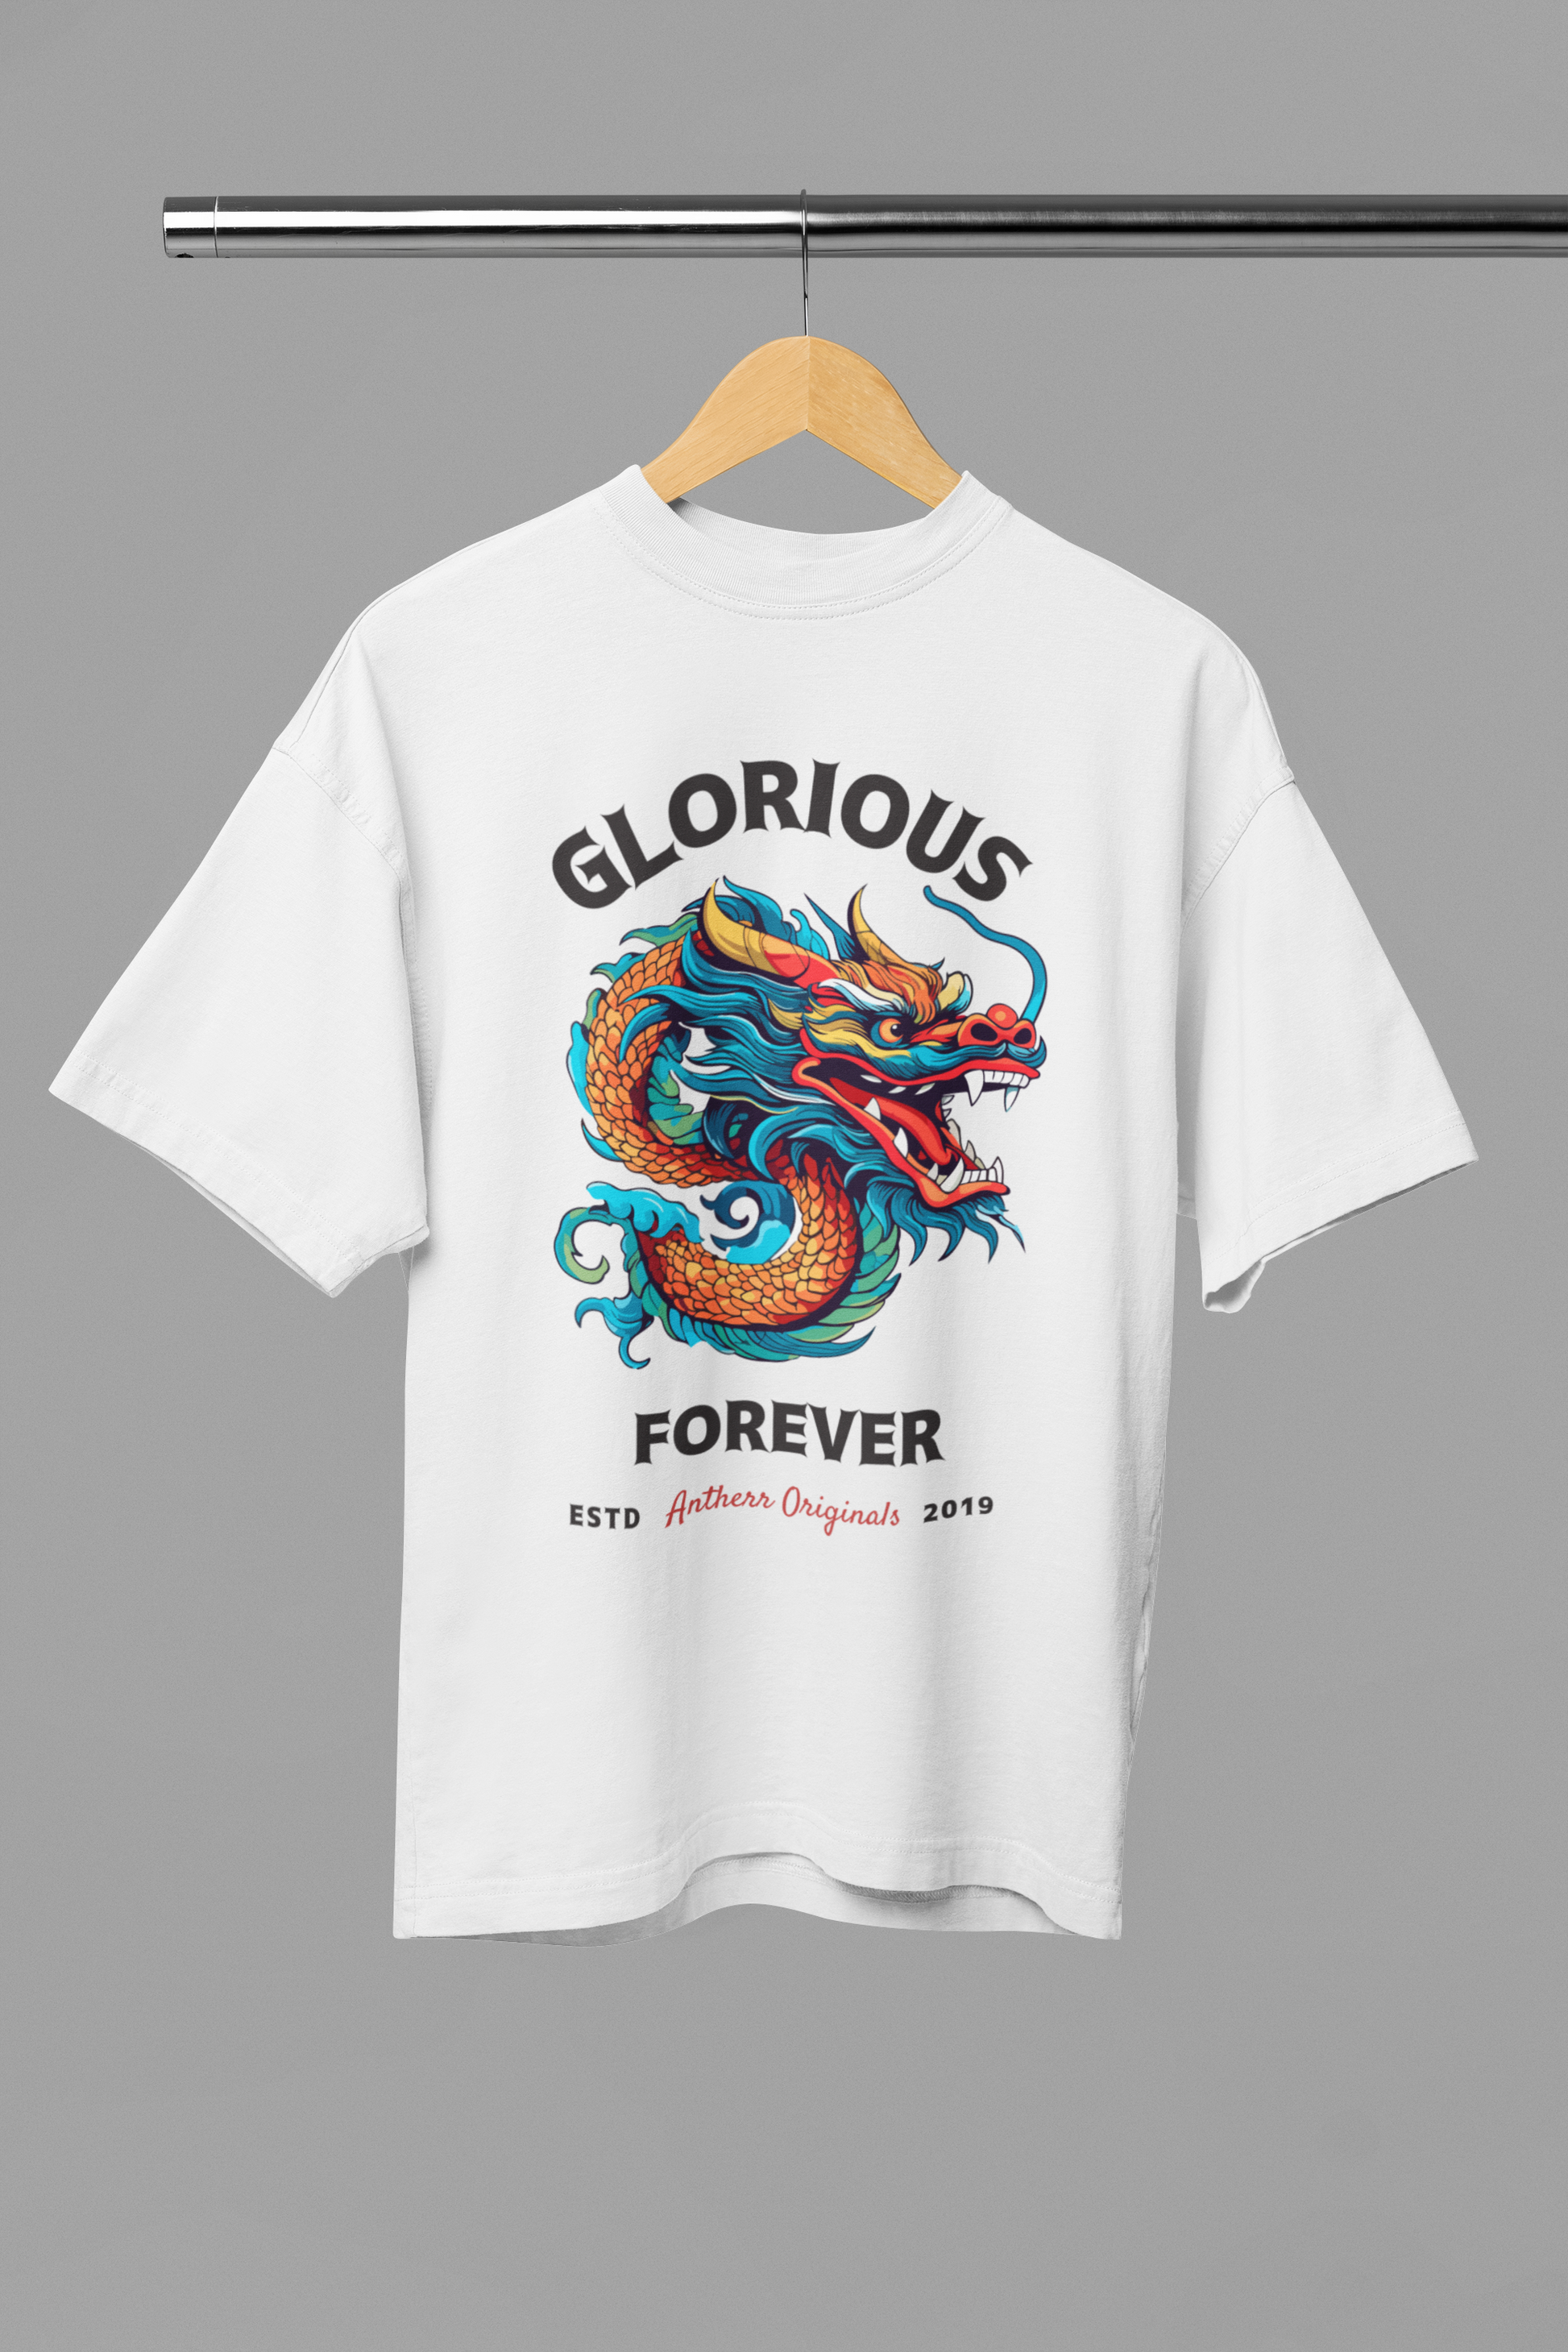 Glorious Forever: Oversized T-Shirts